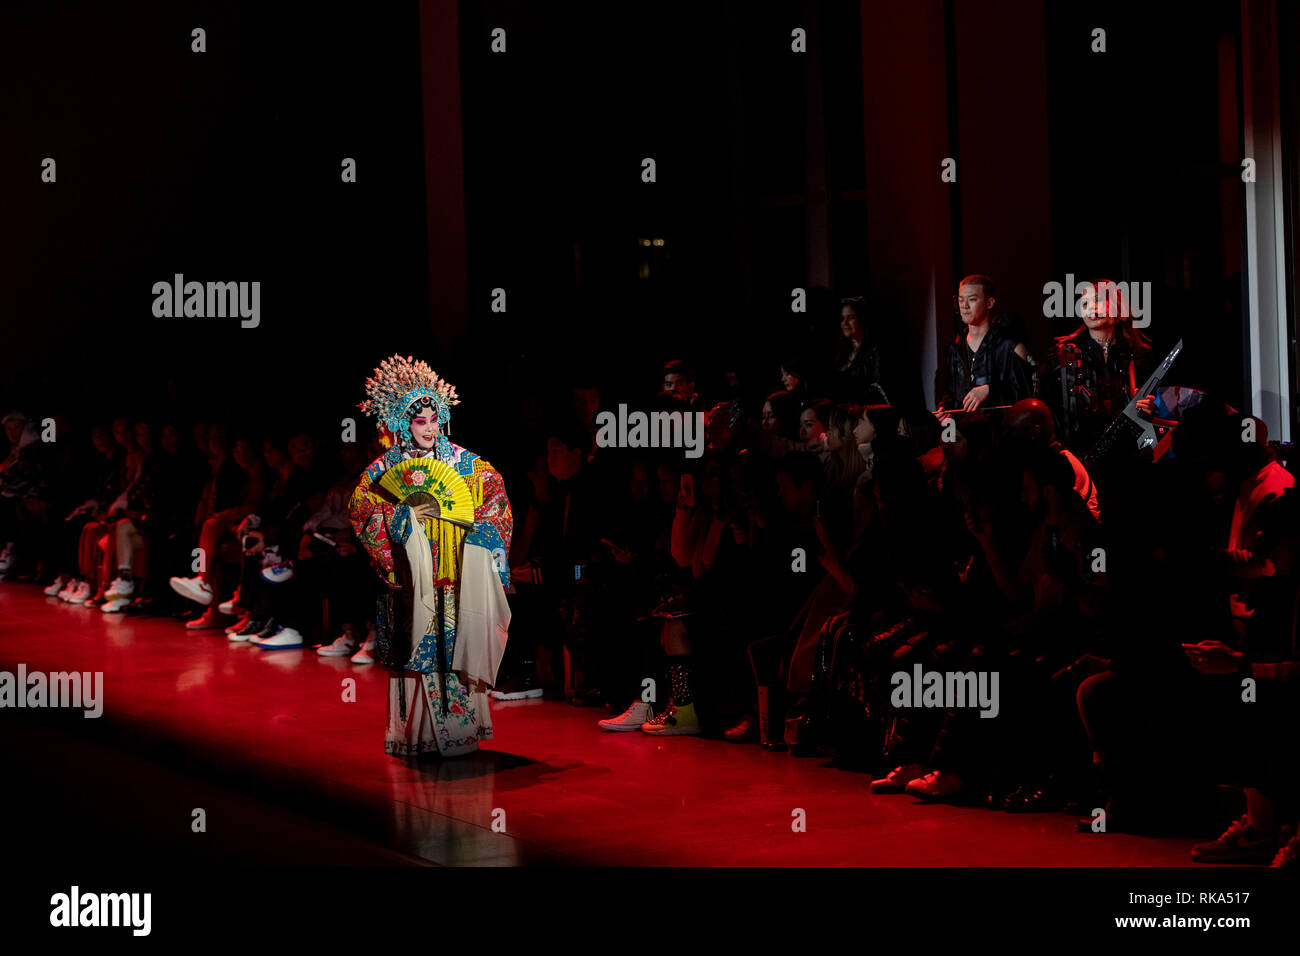 New York, USA. 9th Feb, 2019. An artist performs at the 'PONY X HARBIN' show during the New York Fashion Week in New York, the United States, Feb. 9, 2019. Popular Chinese brand Harbin Beer on Saturday put on an experimental show that blended traditional Chinese culture and American street art at the ongoing New York fashion week. The show started with a short music piece that was a fusion of Peking Opera and R&B, followed by a catwalk show debuting collection jointly presented by Harbin Beer and American sports brand PONY. Credit: Wang Ying/Xinhua/Alamy Live News Stock Photo